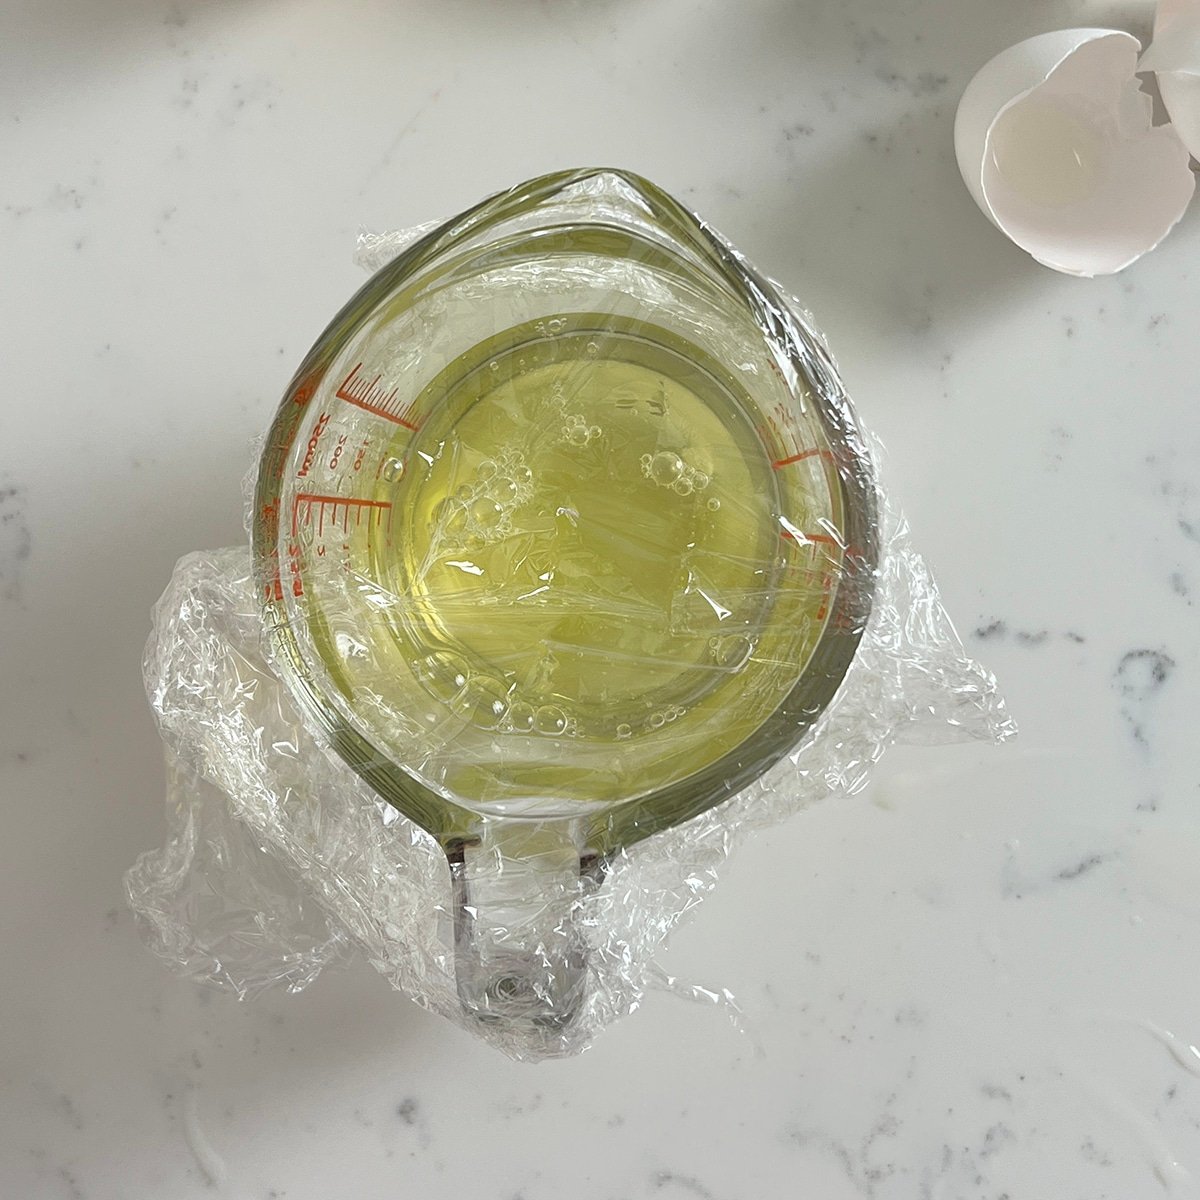 plastic wrap covering egg whites in a measuring cup